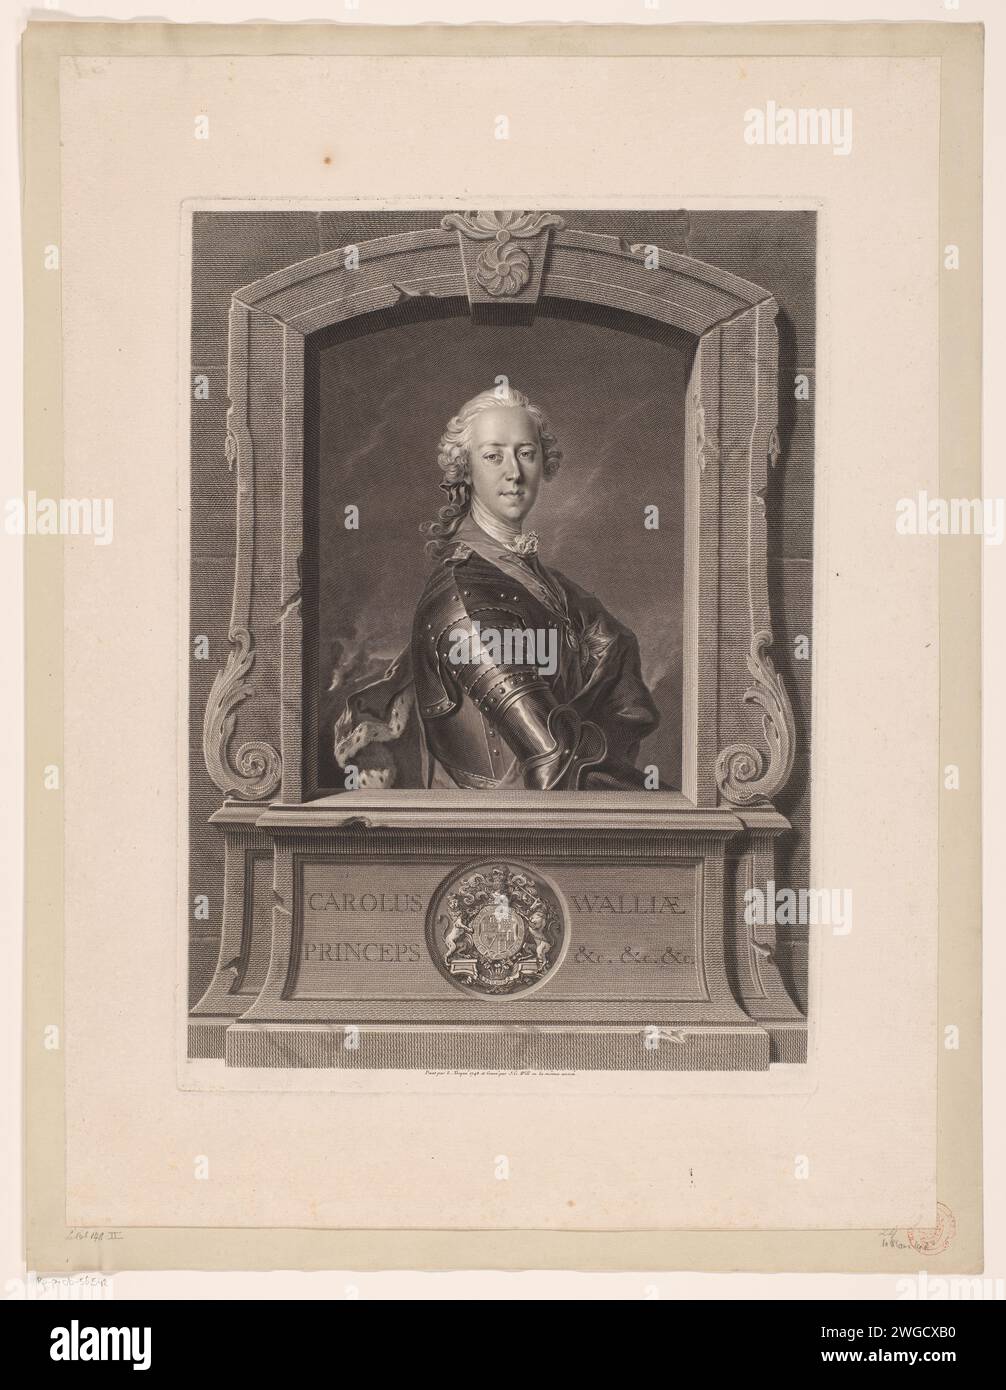 Portrait of Karel Eduard Stuart, Johann Georg Wille, After Louis Tocqué, 1748 print   paper engraving / etching prince. historical persons. armorial bearing, heraldry Stock Photo